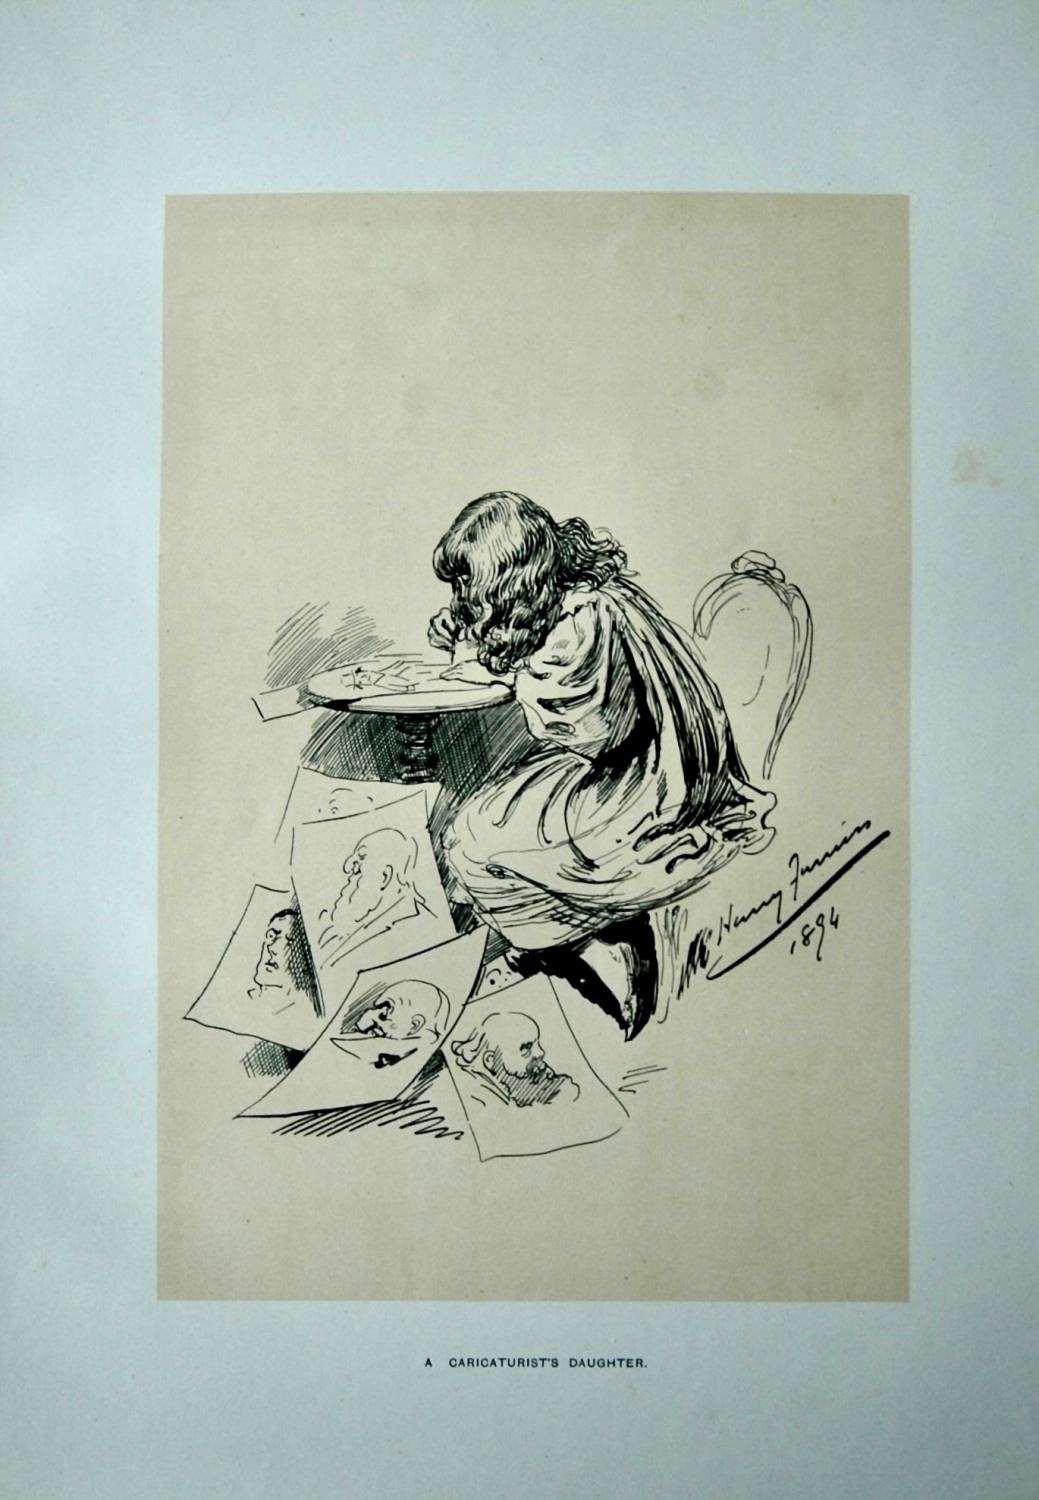 A Caricaturist's Daughter. (By Harry Furniss)  1894.